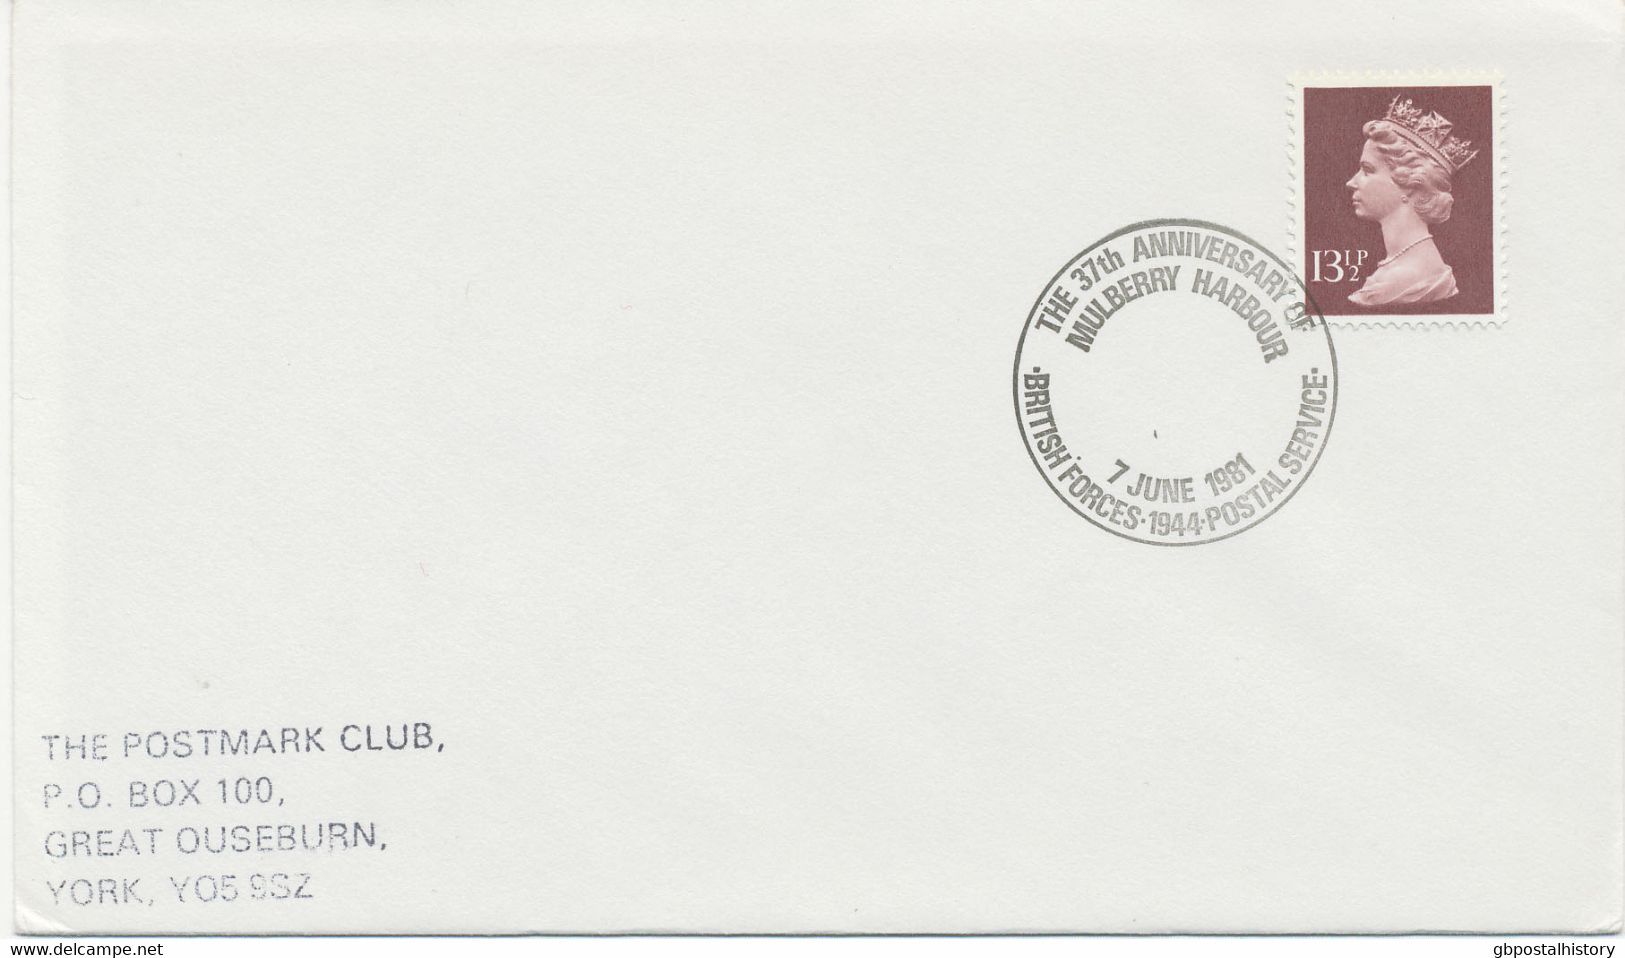 GB SPECIAL EVENT POSTMARKS THE 37th ANNIVERSARY OF MULBERRY HARBOUR - 7 JUNE 1981 - BRITISH FORCES 1944 POSTAL SERVICE - Postmark Collection